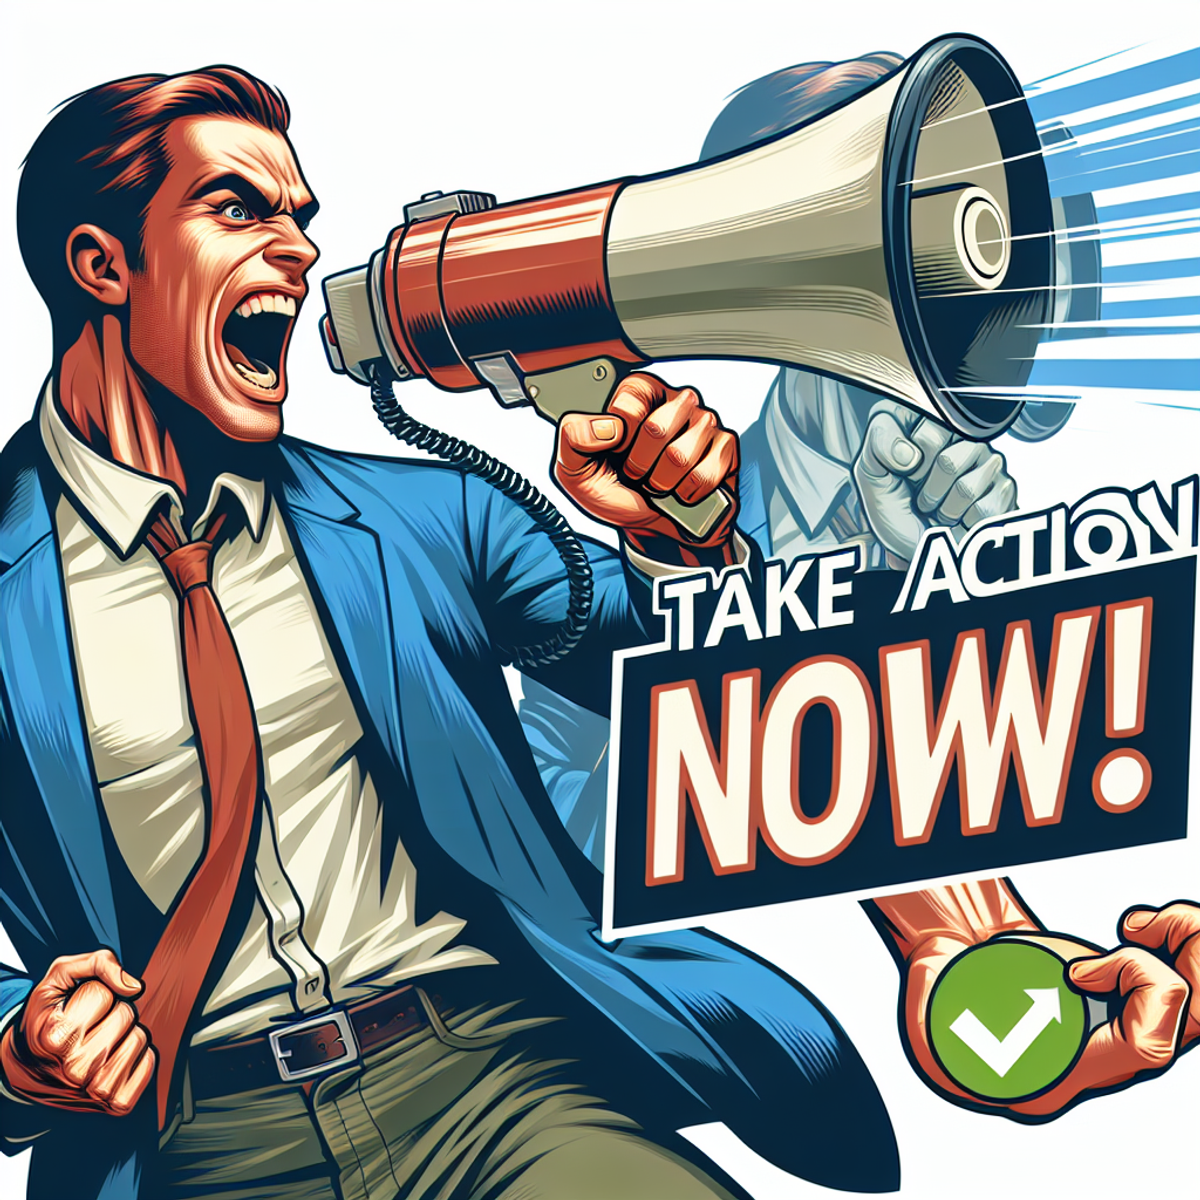 An enthusiastic person with raised arms holds a megaphone, their face filled with determination and passion. The megaphone emits dynamic sound waves, symbolizing urgency and a call to action.